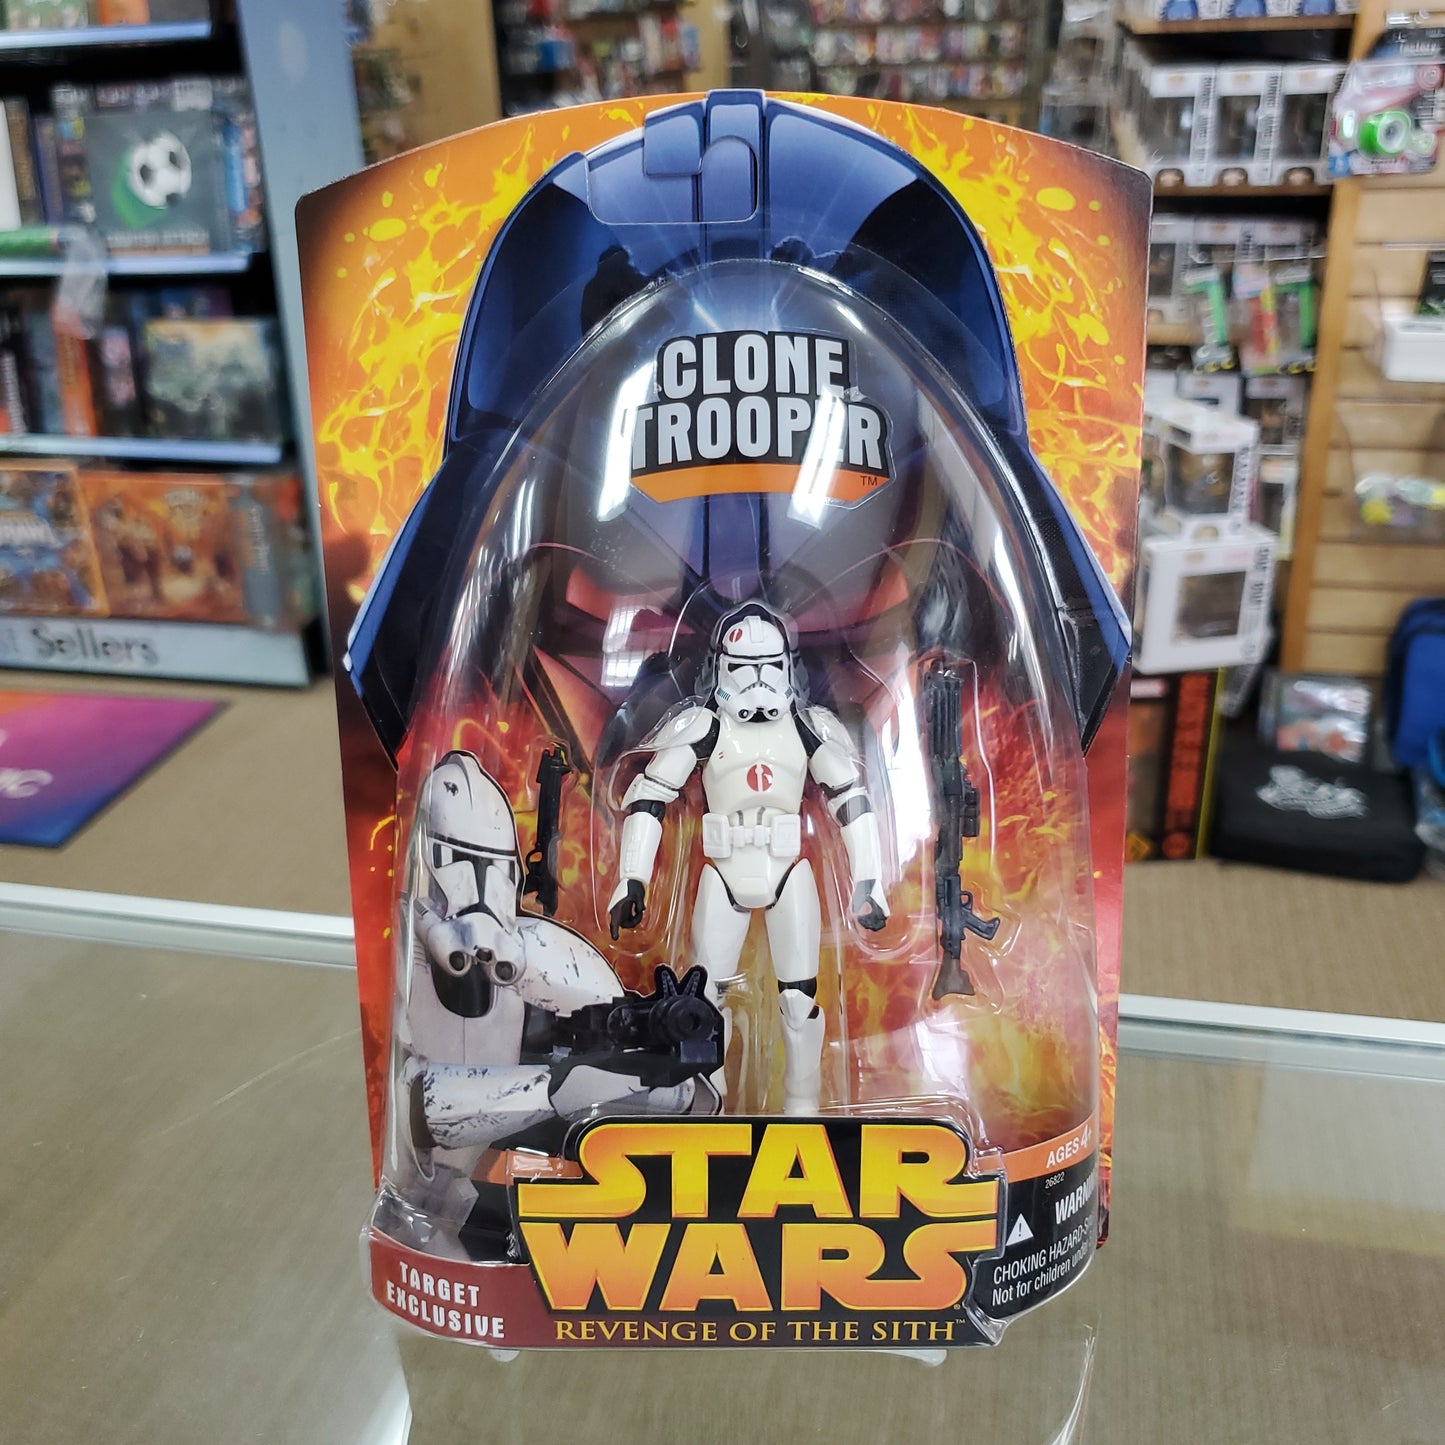 Clone Trooper (Target) - Star Wars Revenge of the Sith Action Figure